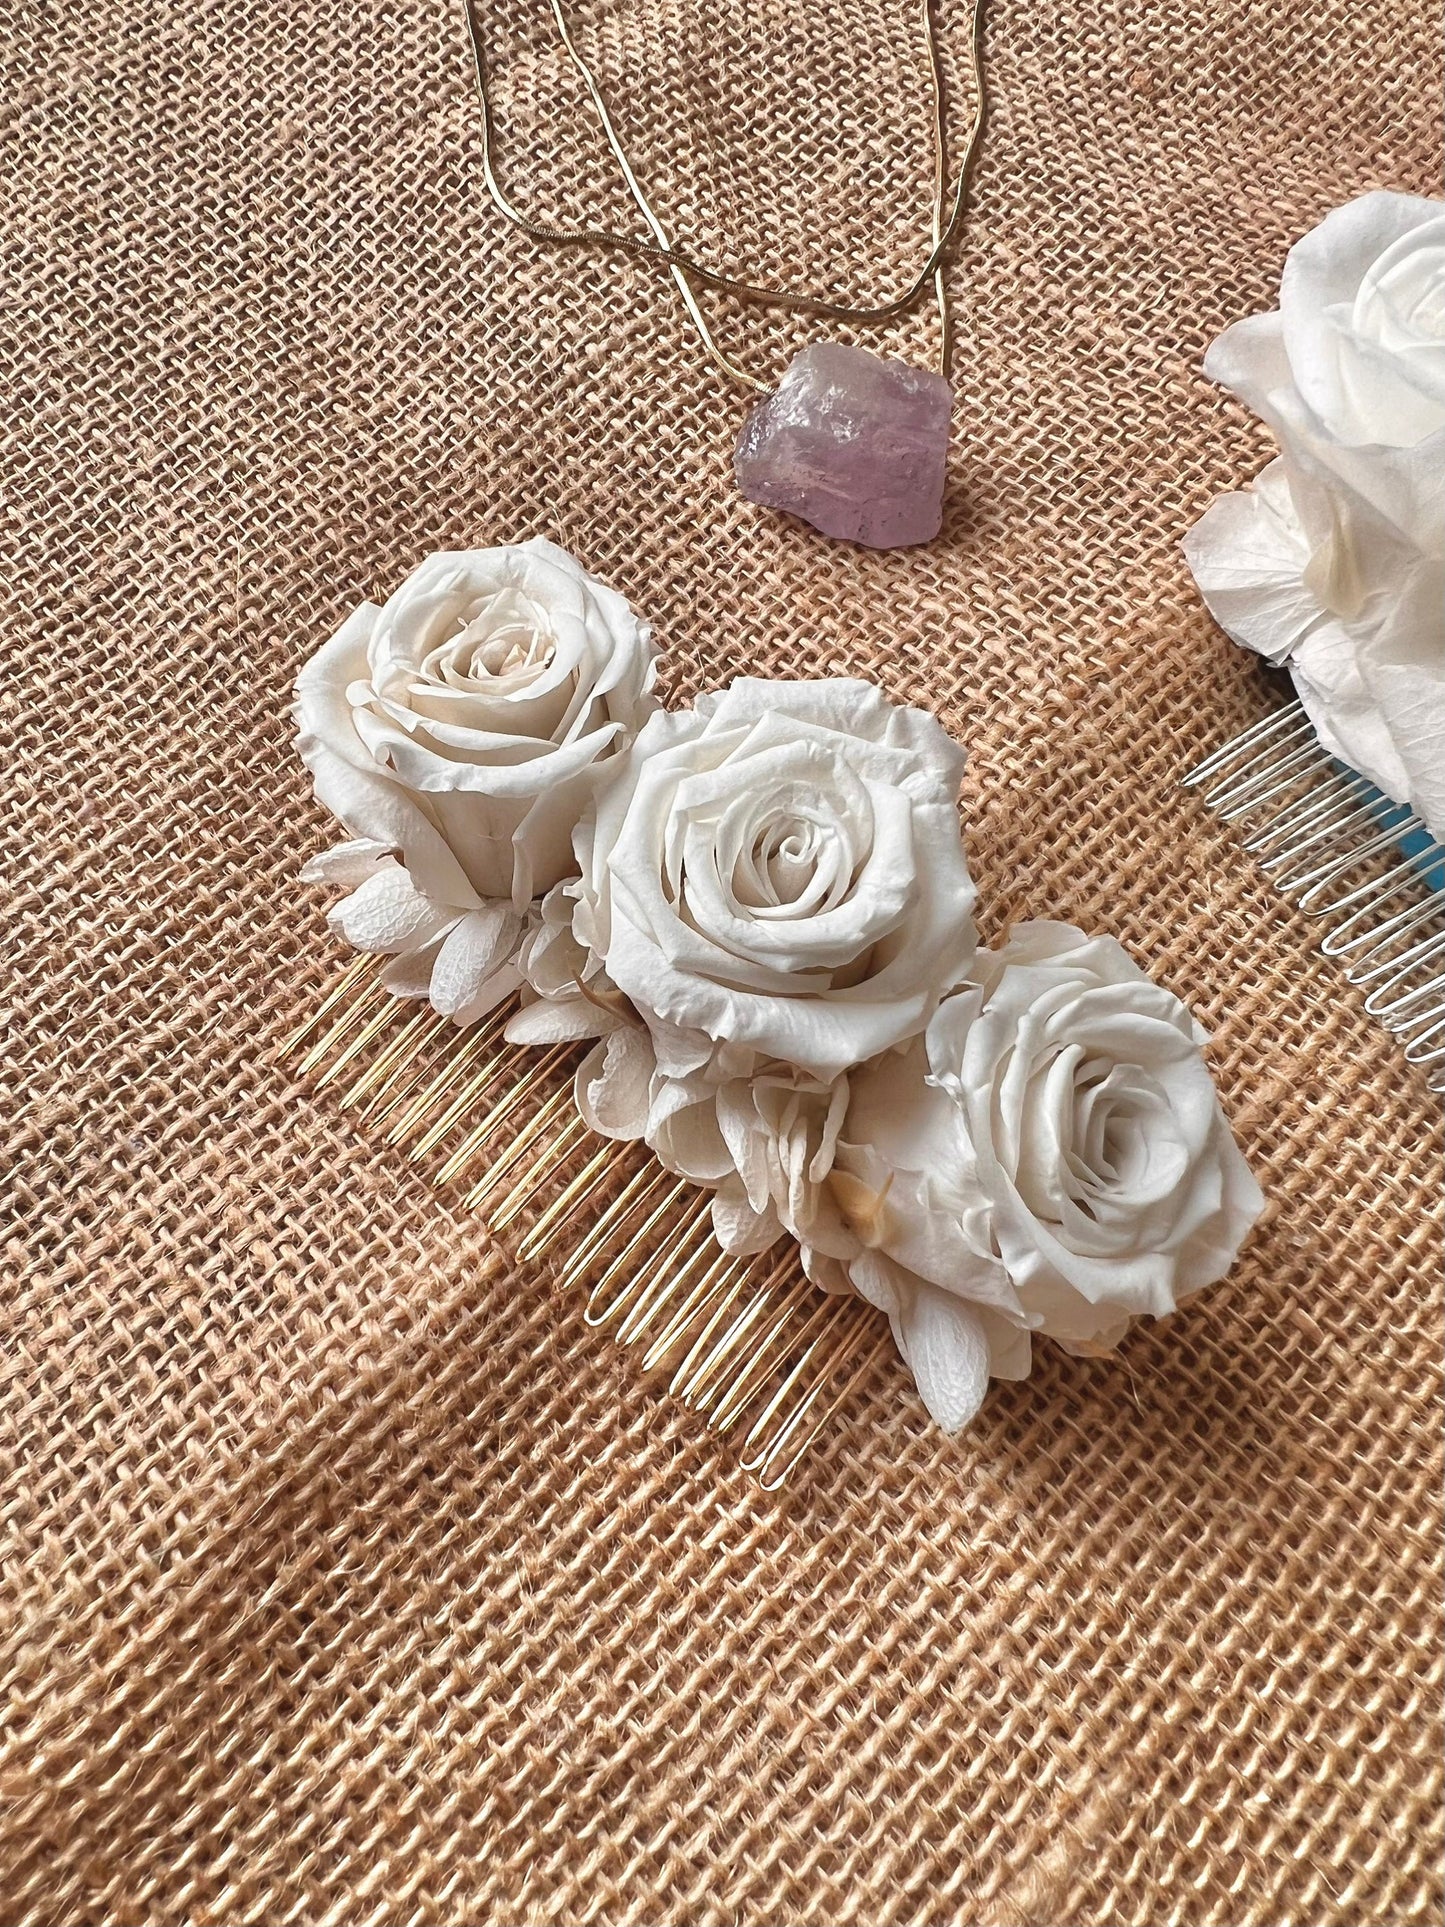 Ivory White Bridal Rose Hair Comb, Preserved Roses Wedding Hair Piece, Boho Bridal Dried Flower Comb, Minimal Elegant Hair Piece in Gold